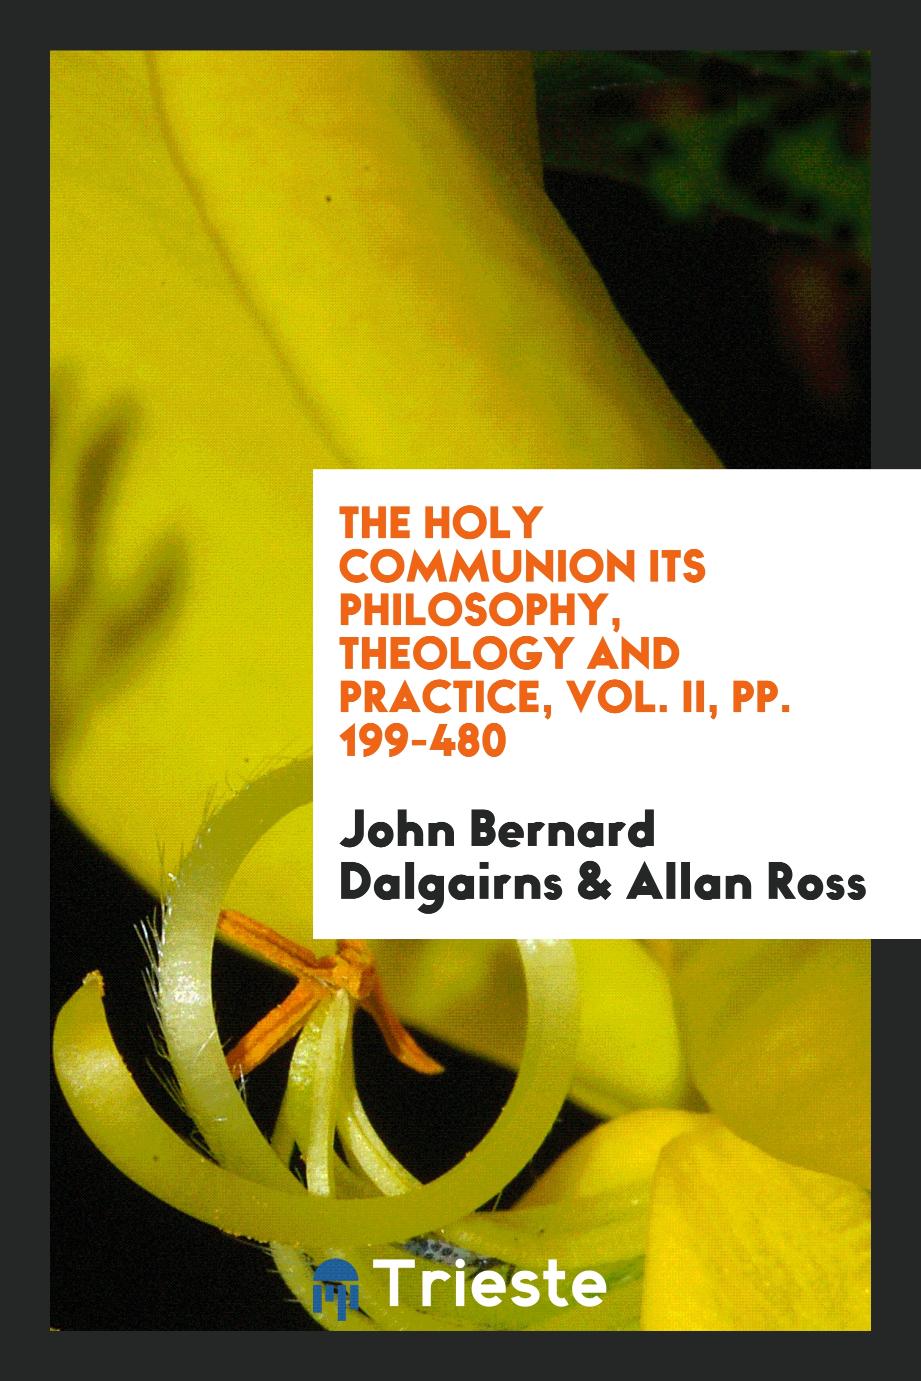 The Holy Communion its philosophy, theology and practice, Vol. II, pp. 199-480